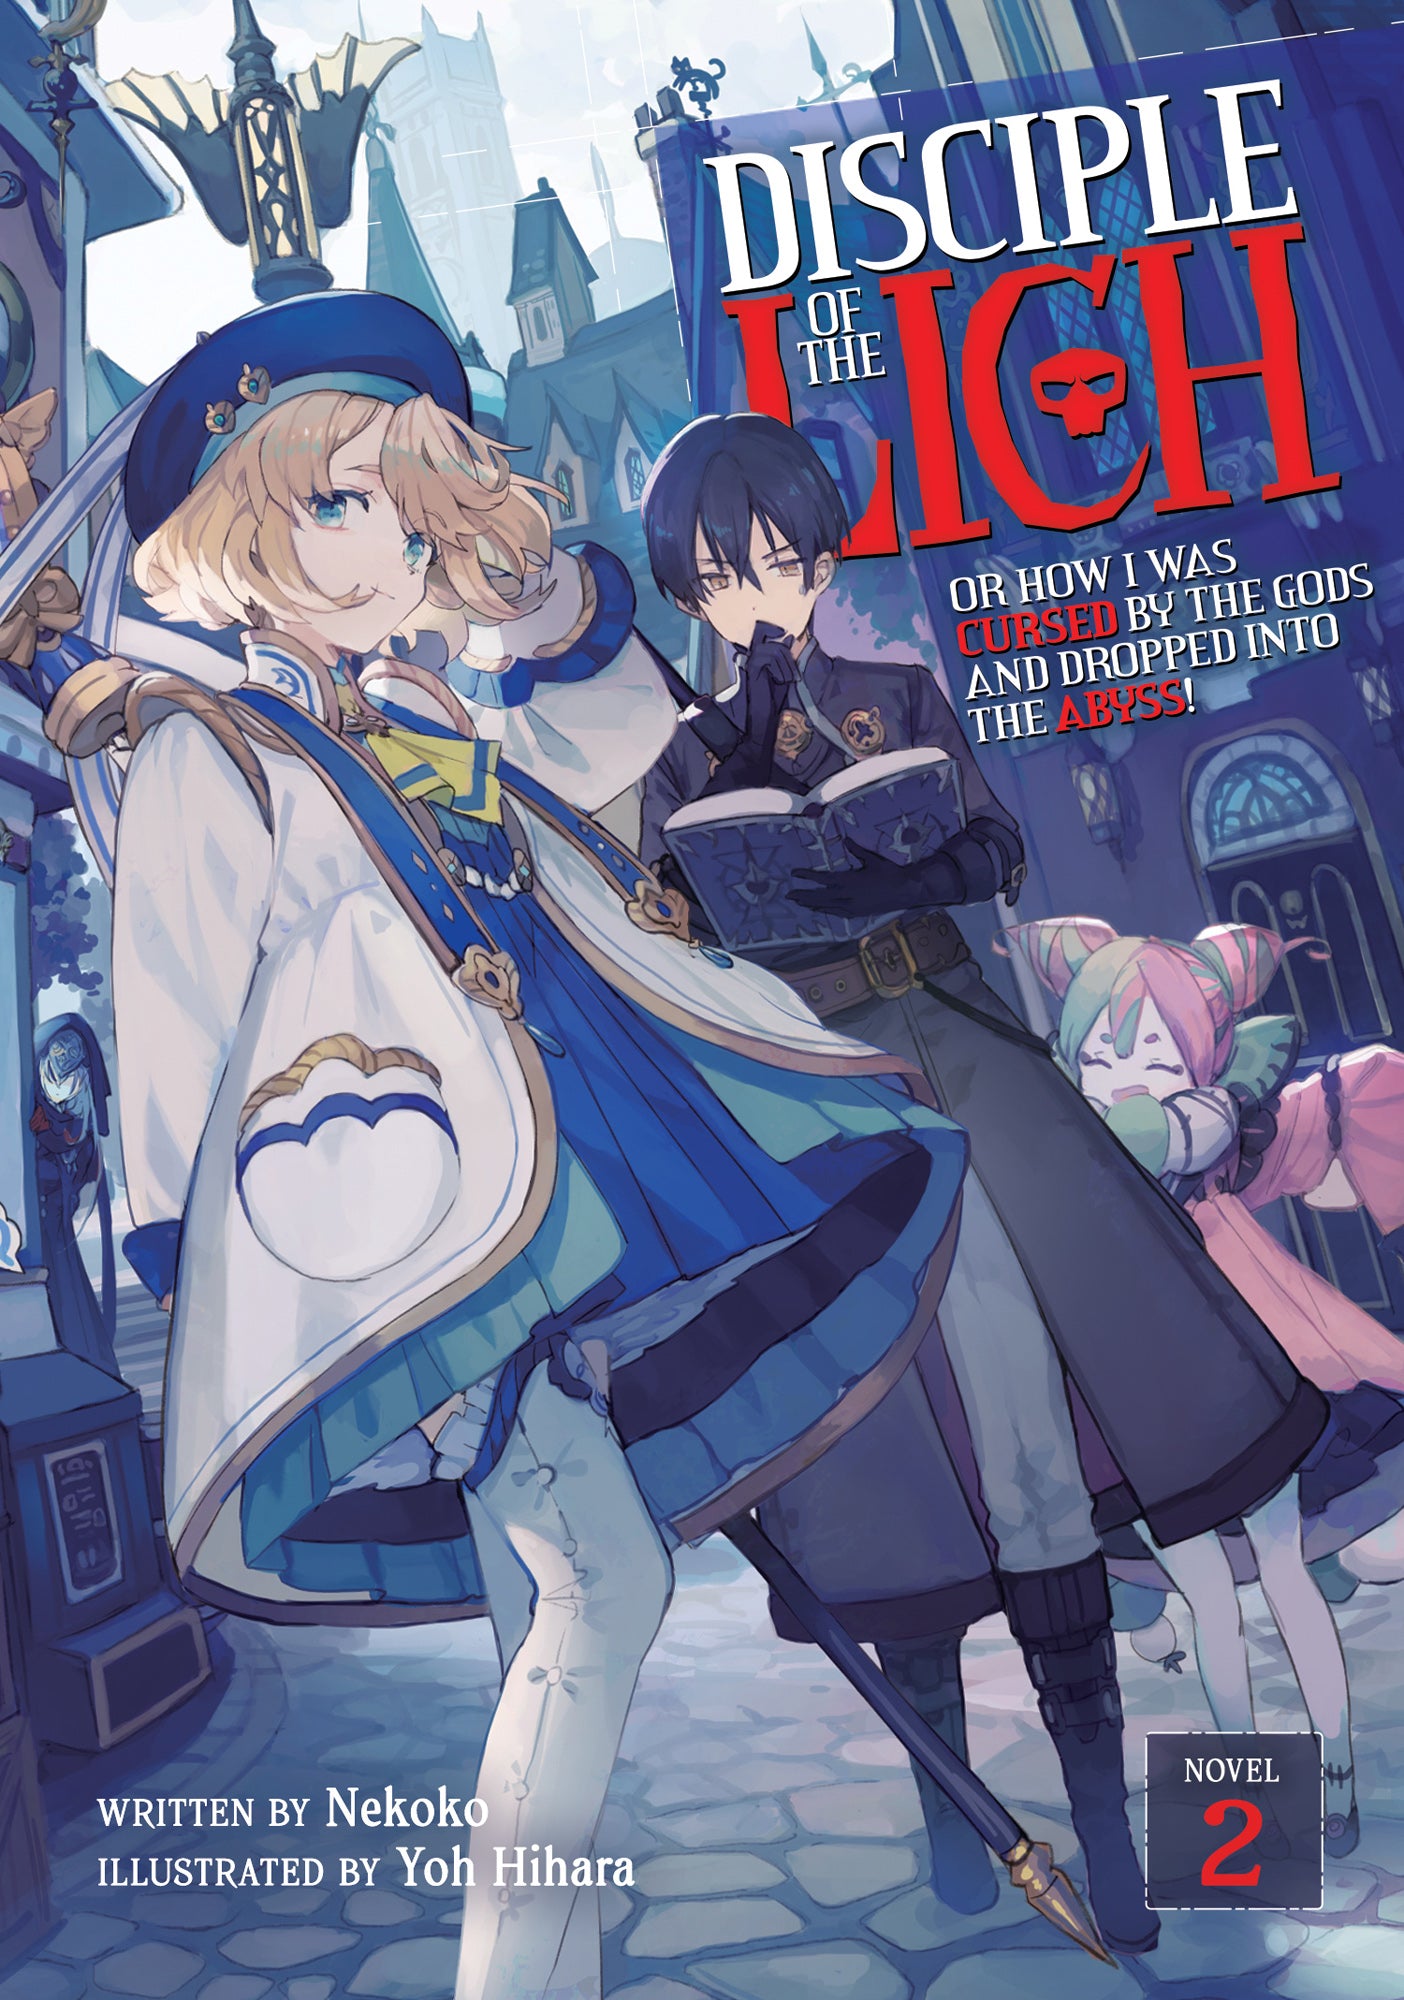 Disciple of the Lich: Or How I Was Cursed by the Gods and Dropped Into the Abyss! (Light Novel) Vol. 02